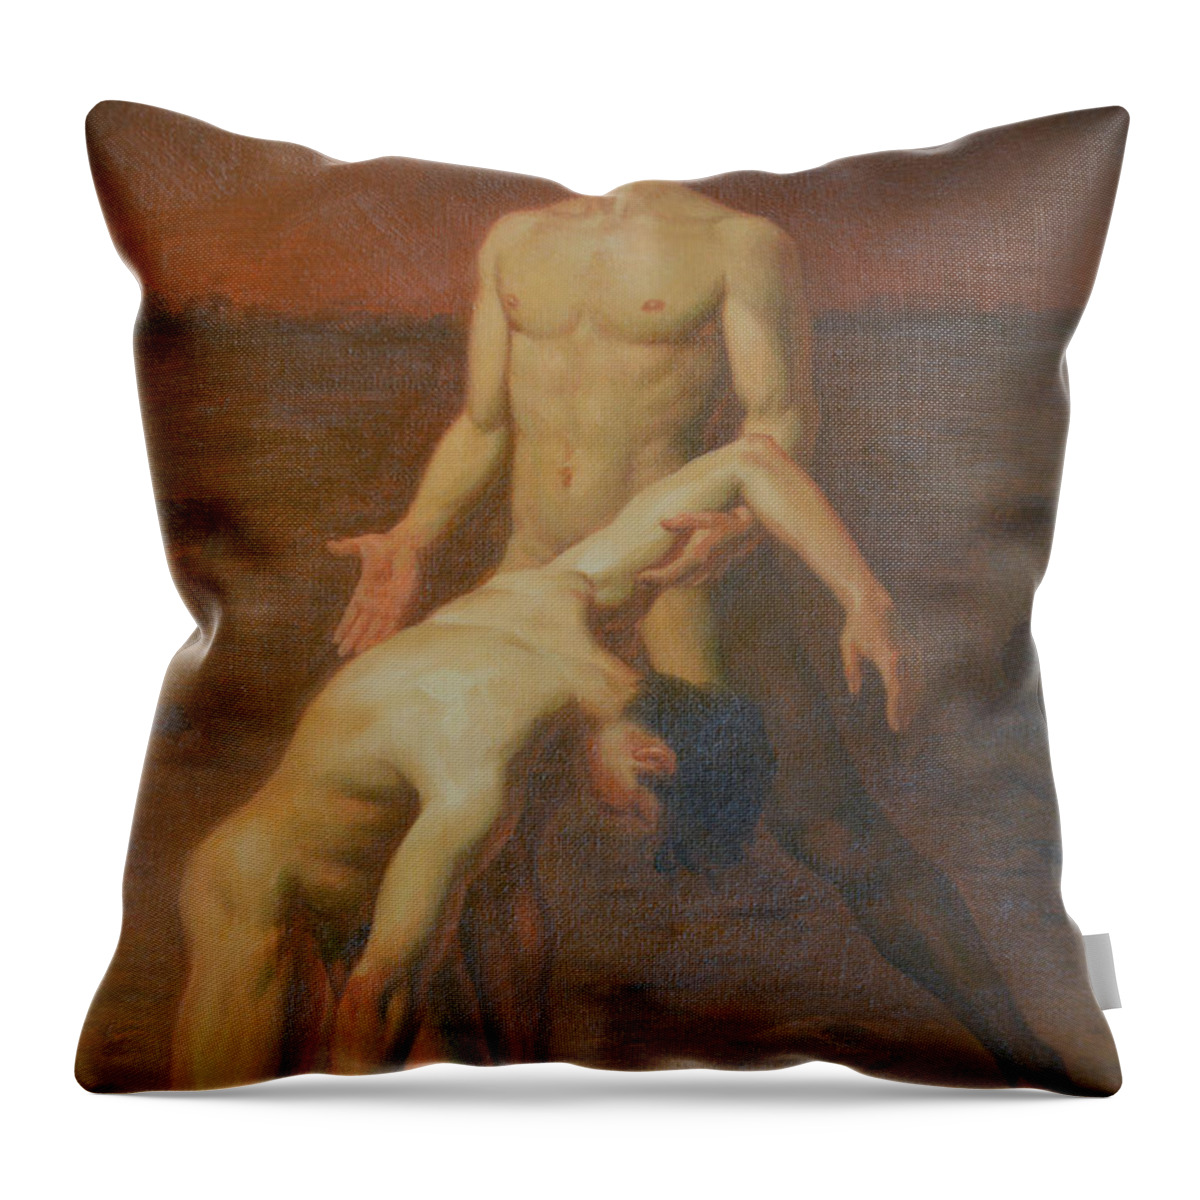 Original Throw Pillow featuring the painting Original Classic Oil Painting Body Art - Two Male Nude- 034 by Hongtao Huang